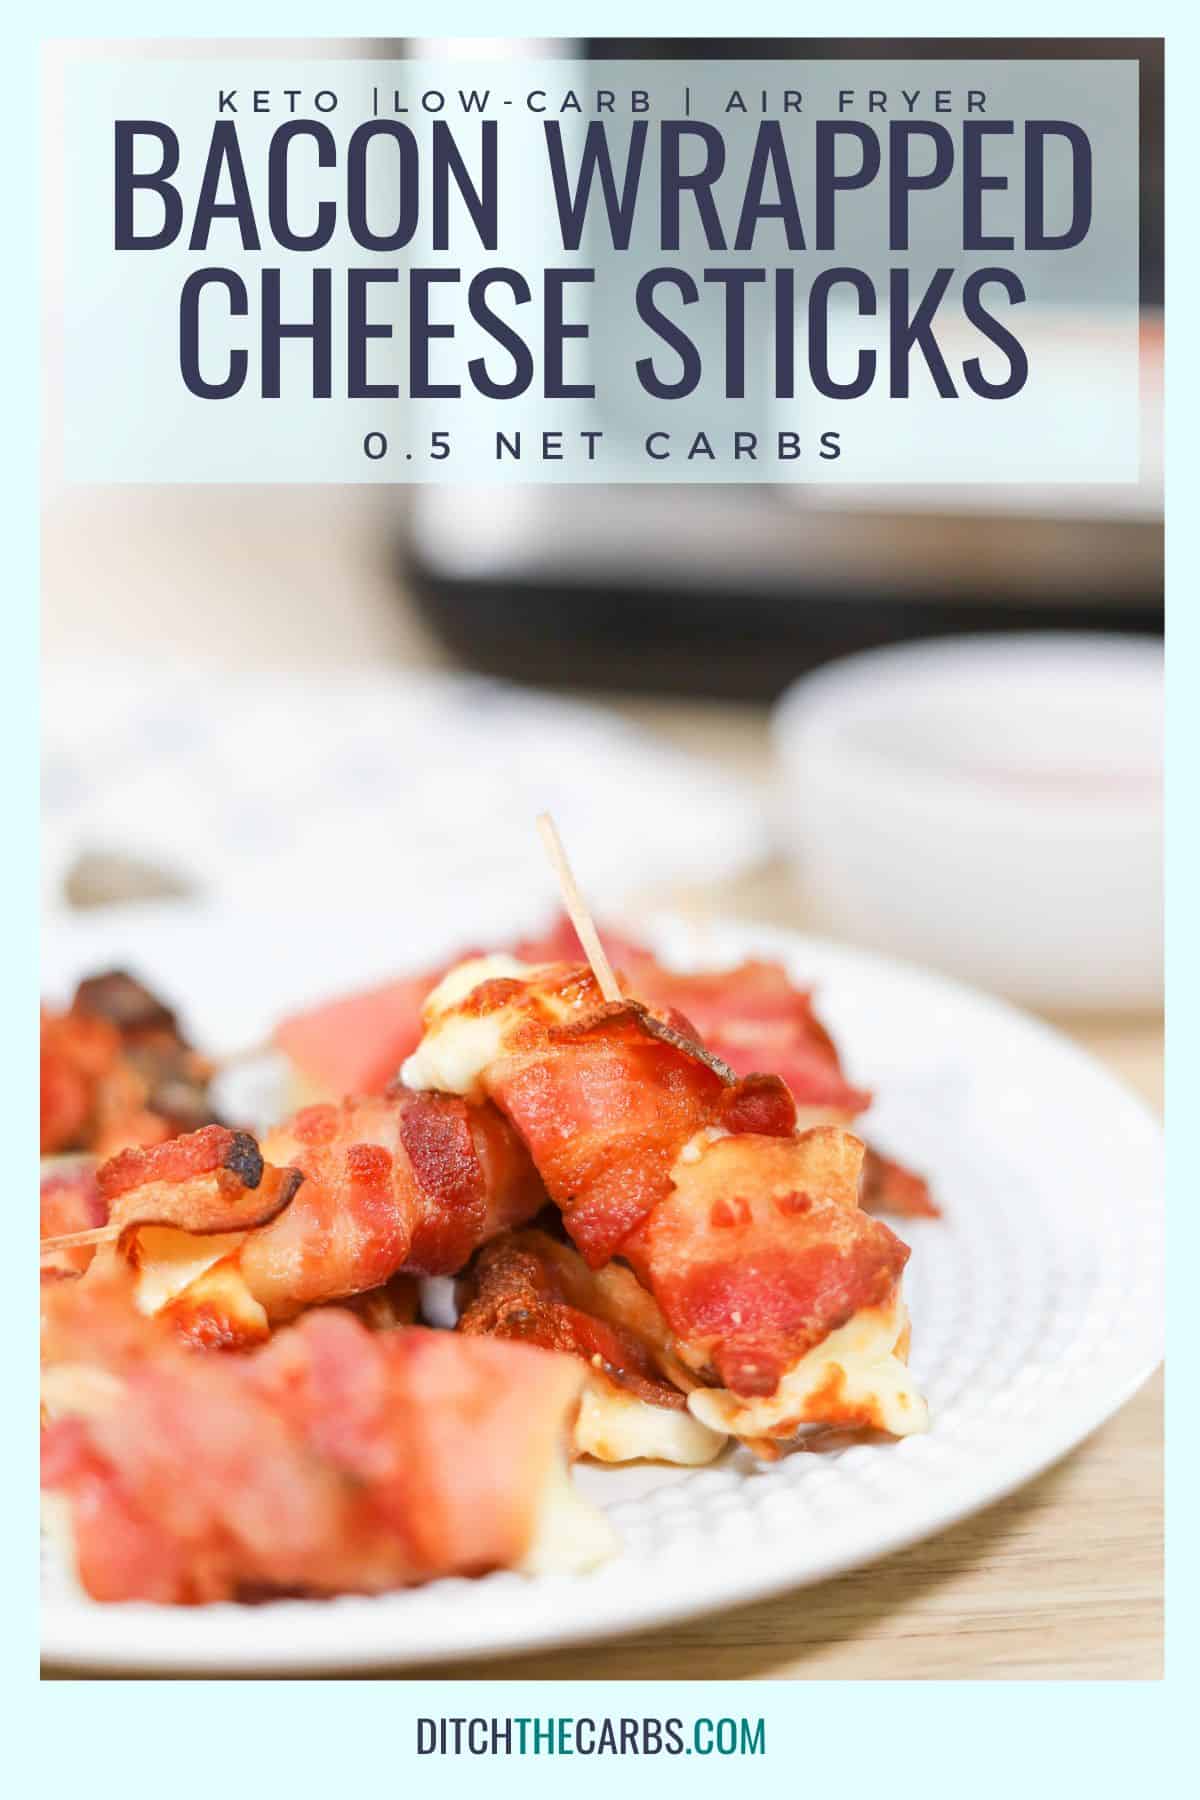 keto low carb air fryer bacon wrapped cheese sticks pinterest image